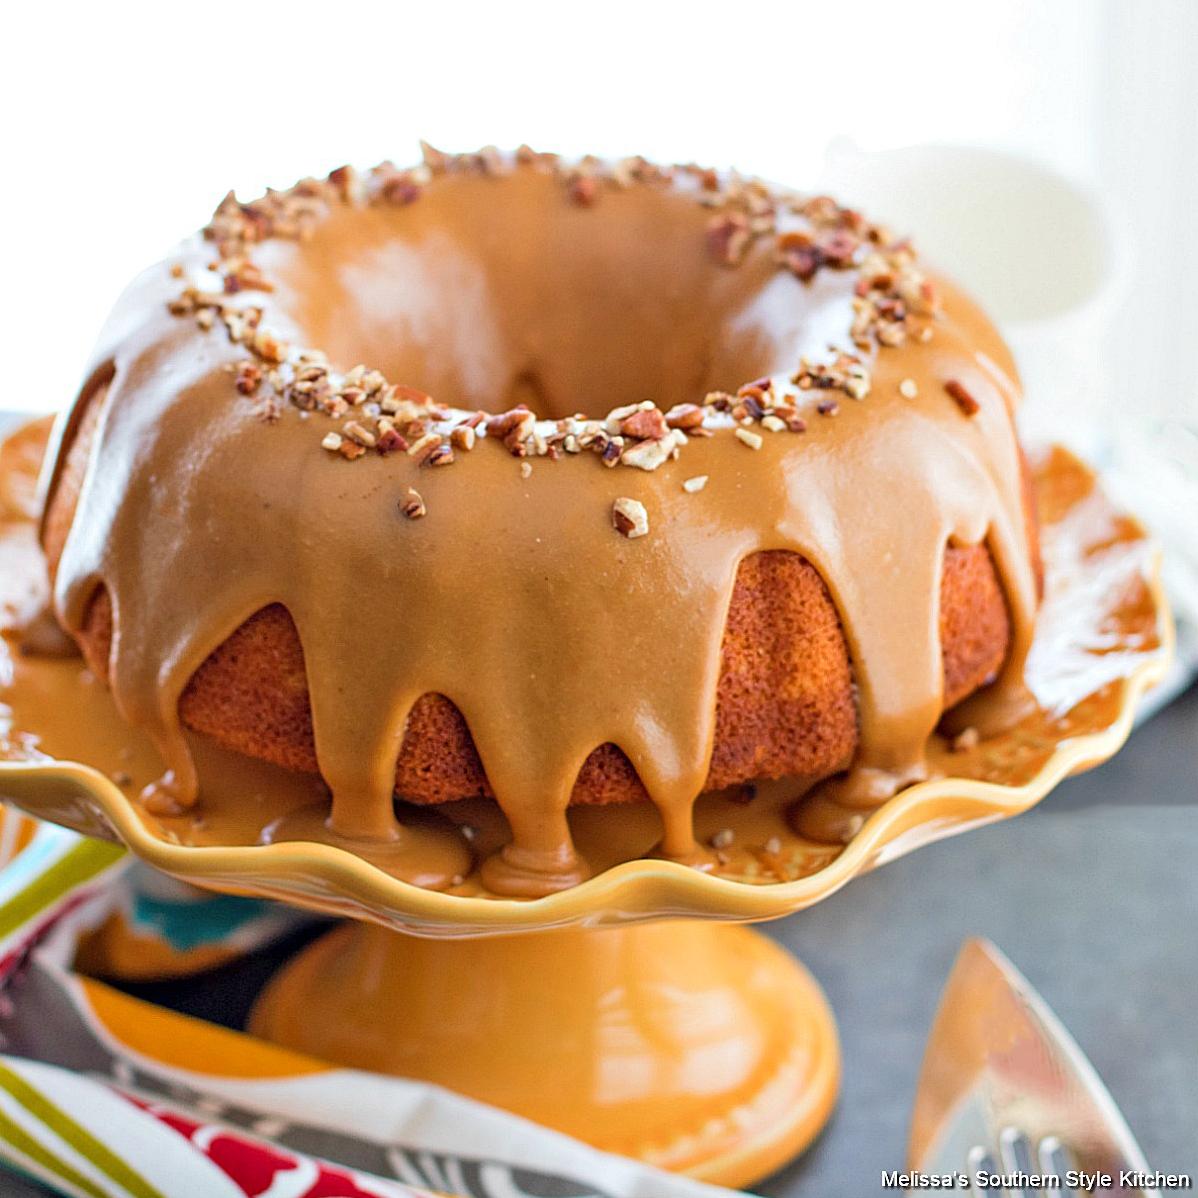  Every slice of this caramel pound cake is a mouthwatering work of art.